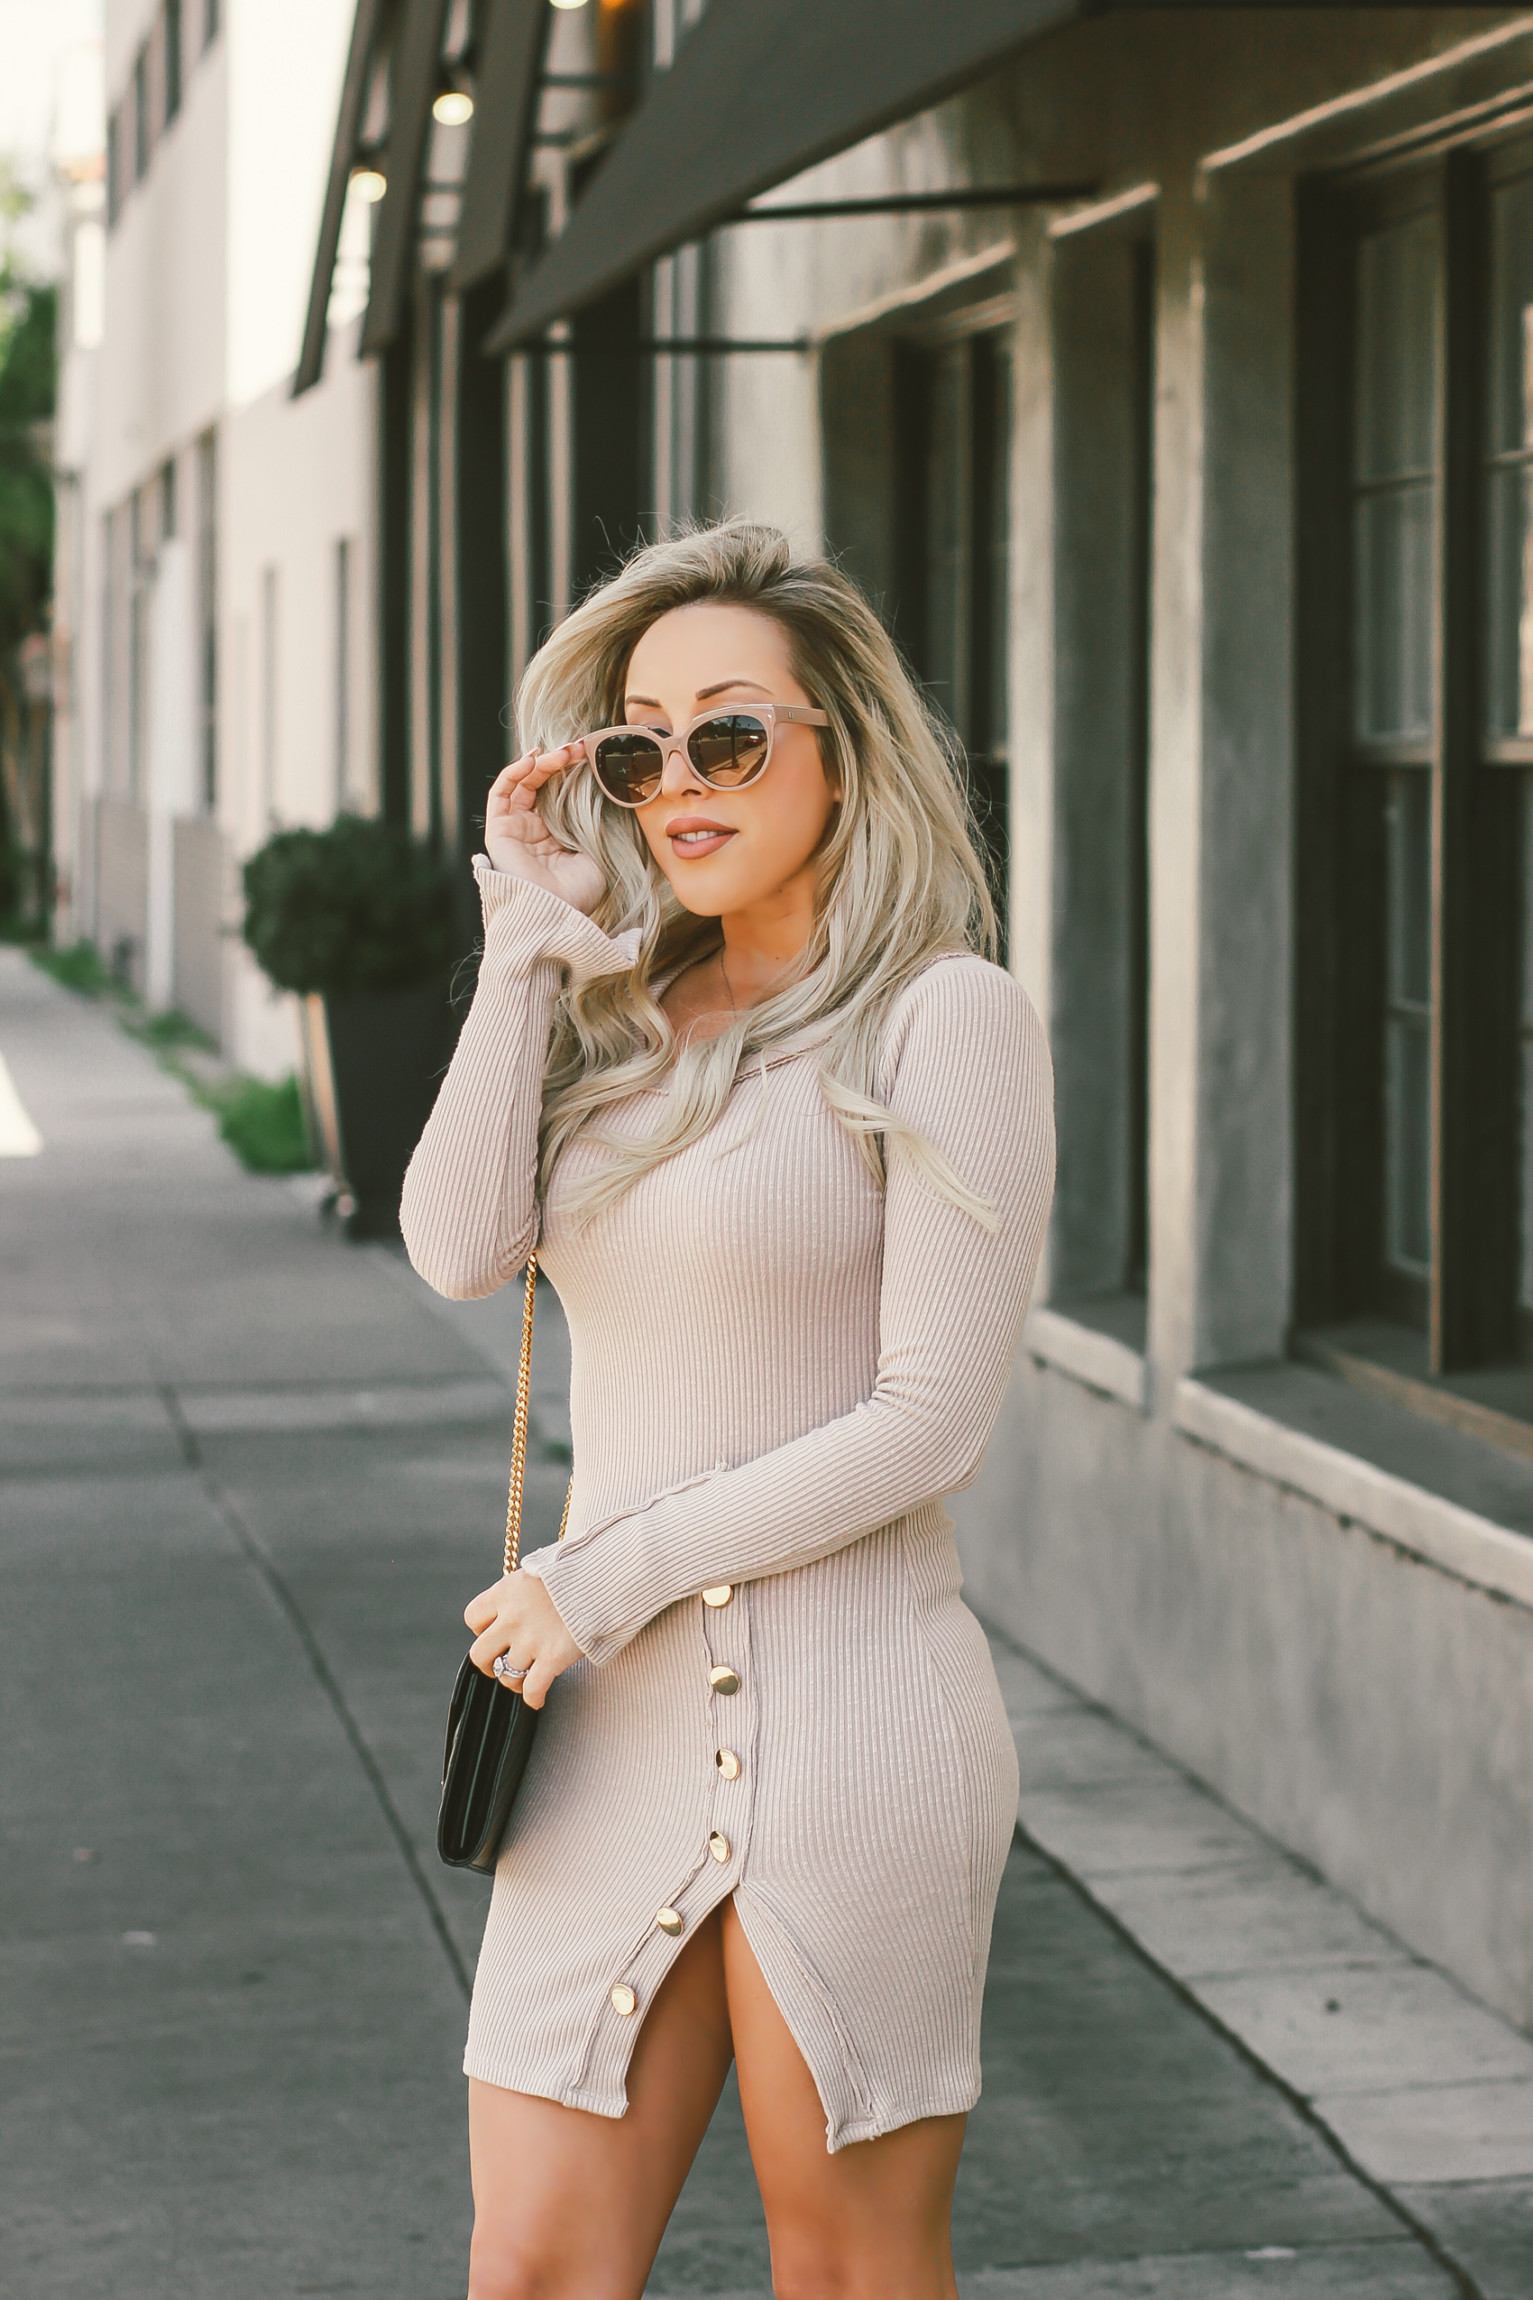 Beige/Neutral Sexy Button Sweater Dress | Balenciaga Sunglasses, Nude Louboutins, Black YSL | Blondie in the City by Hayley Larue